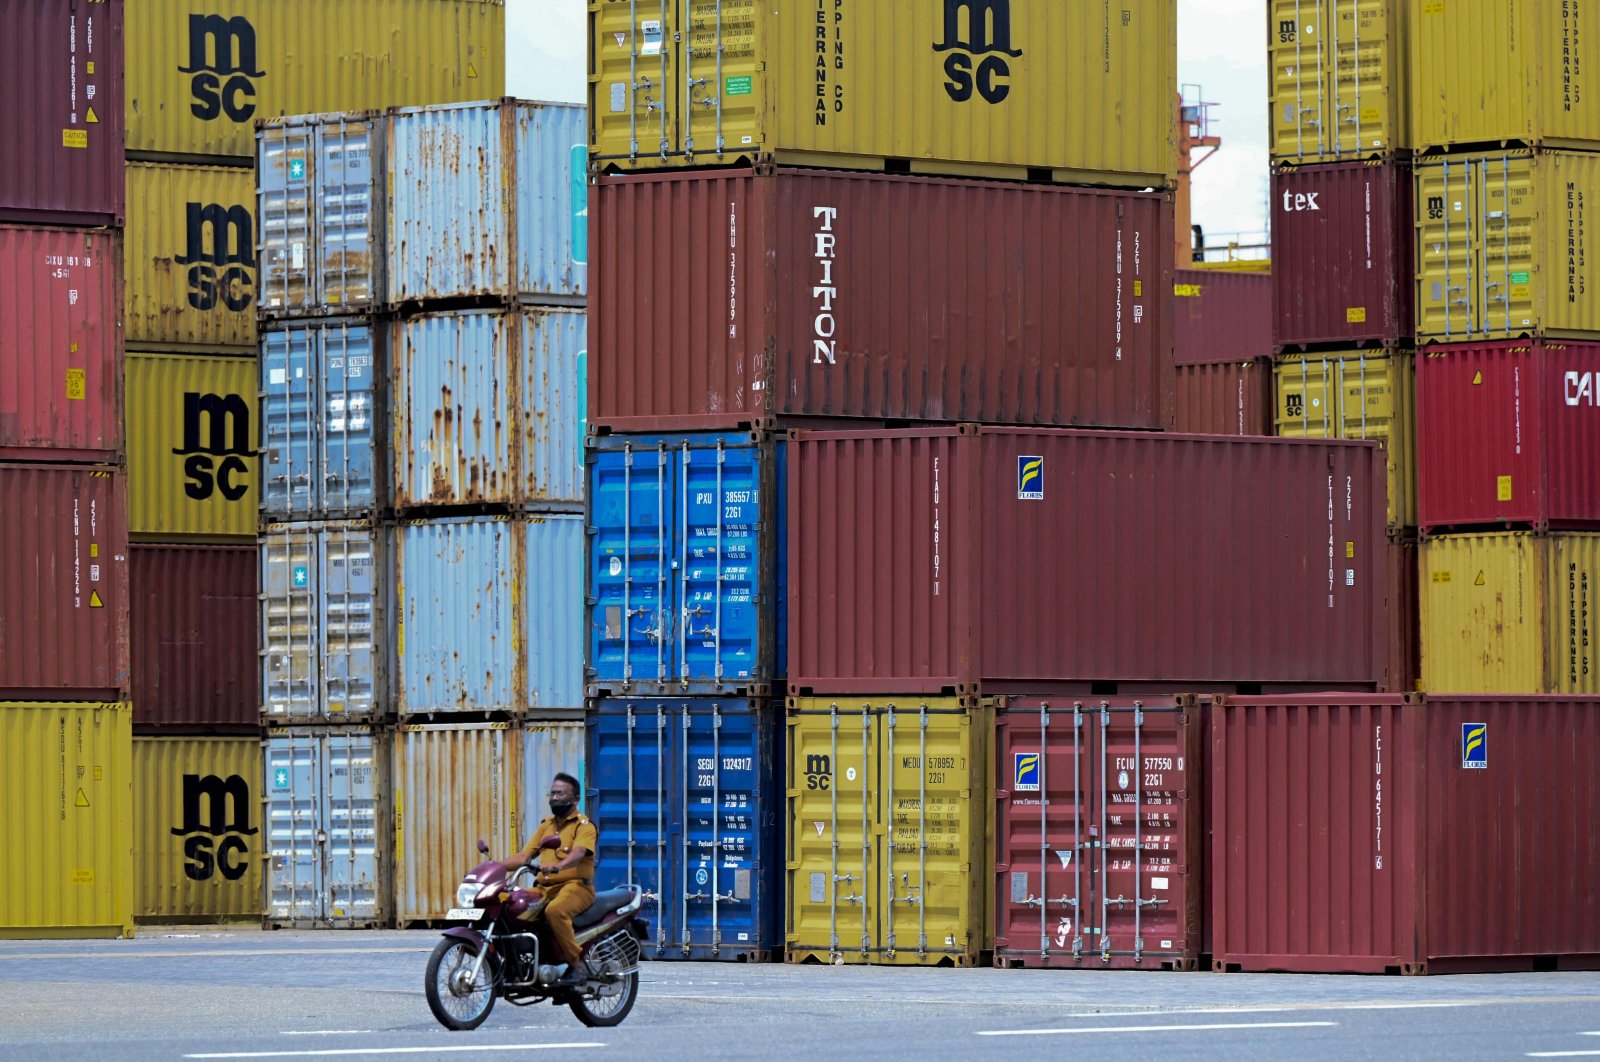 A motorcyclist rides past containers at the East Terminal operated part of the Colombo port, Sri Lanka, June 4, 2021. (AFP Photo)